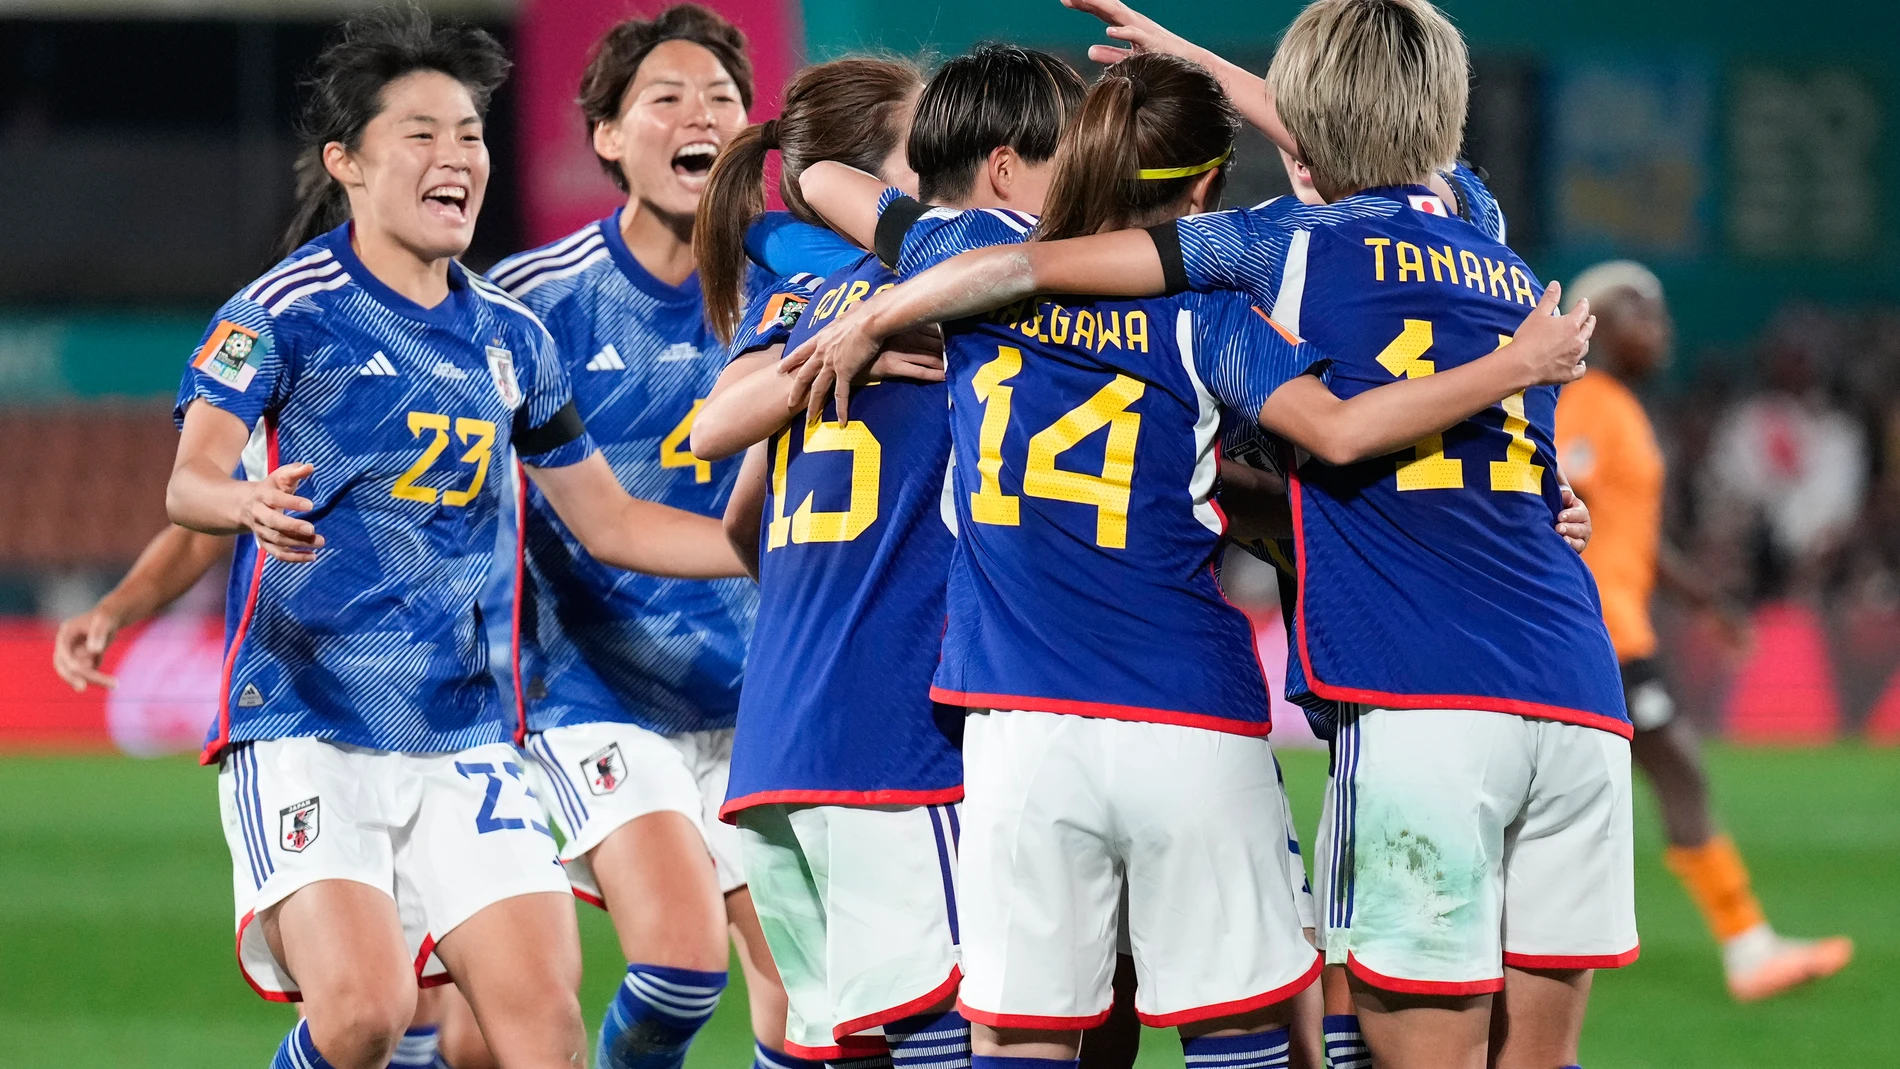 Japan celebrate after their first goal during the Women's World Cup Group C soccer match between Zambia and Japan in Hamilton, New Zealand, Saturday, July 22, 2023. (AP Photo/John Cowpland)